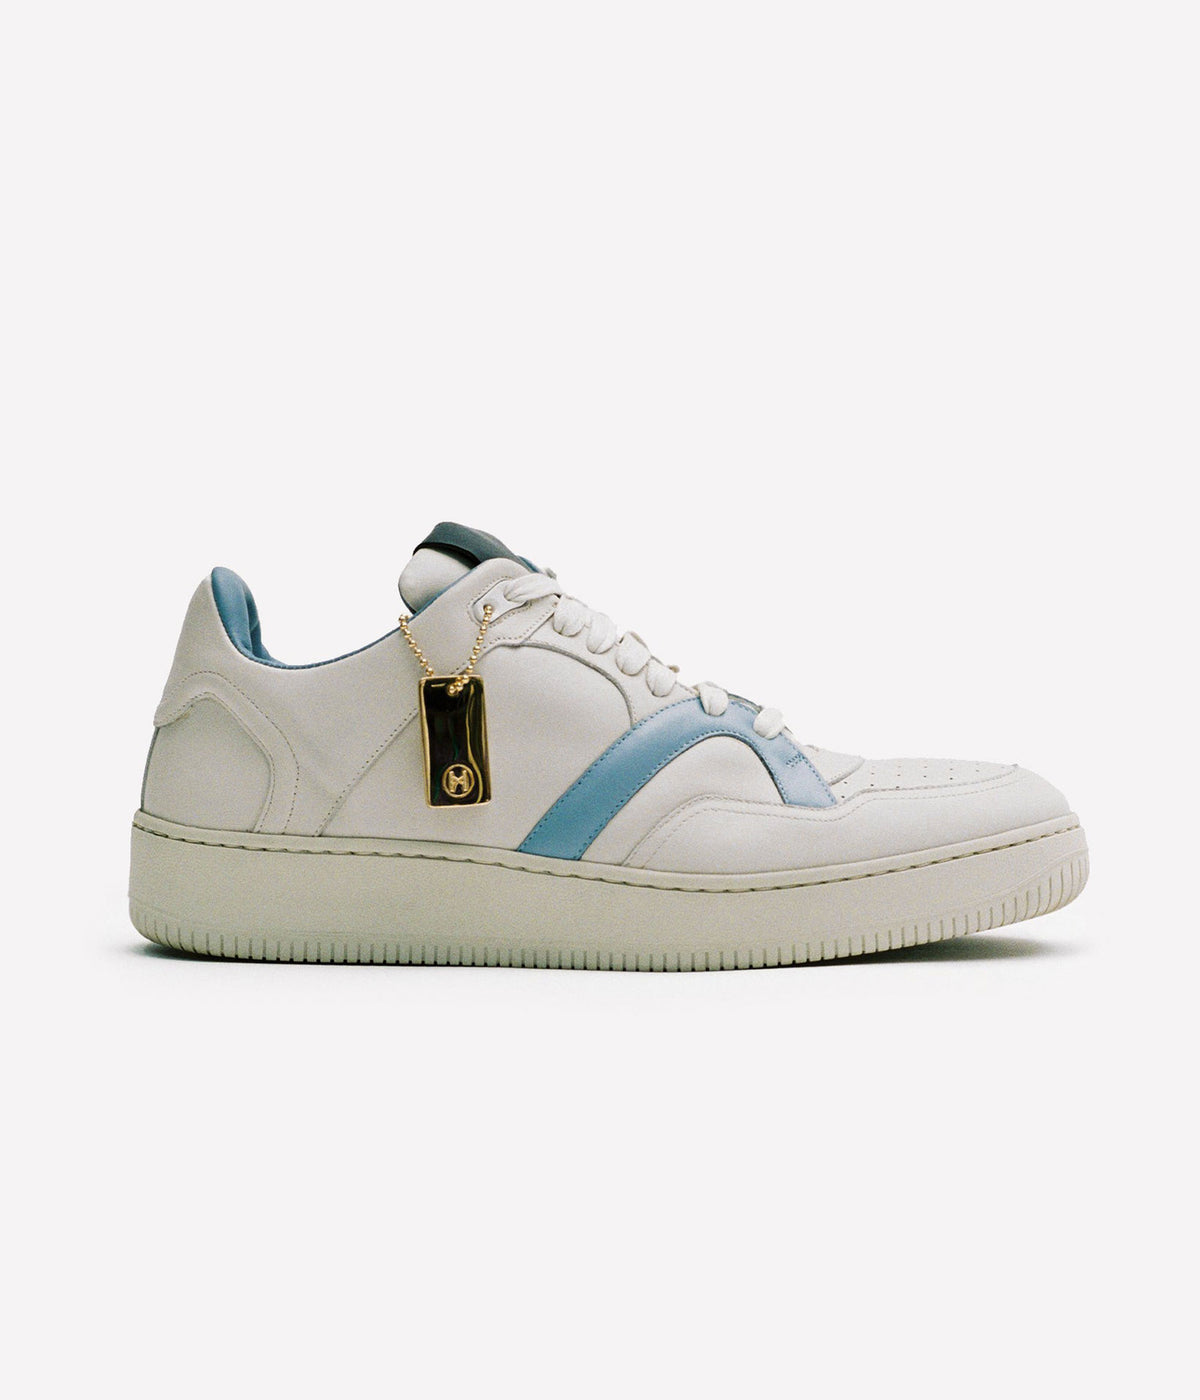 HUMAN RECREATIONAL SERVICES MONGOOSE LOW SHOE IN BONE BLUE AND BLACK MADE WITH ITALIAN CALF SKIN